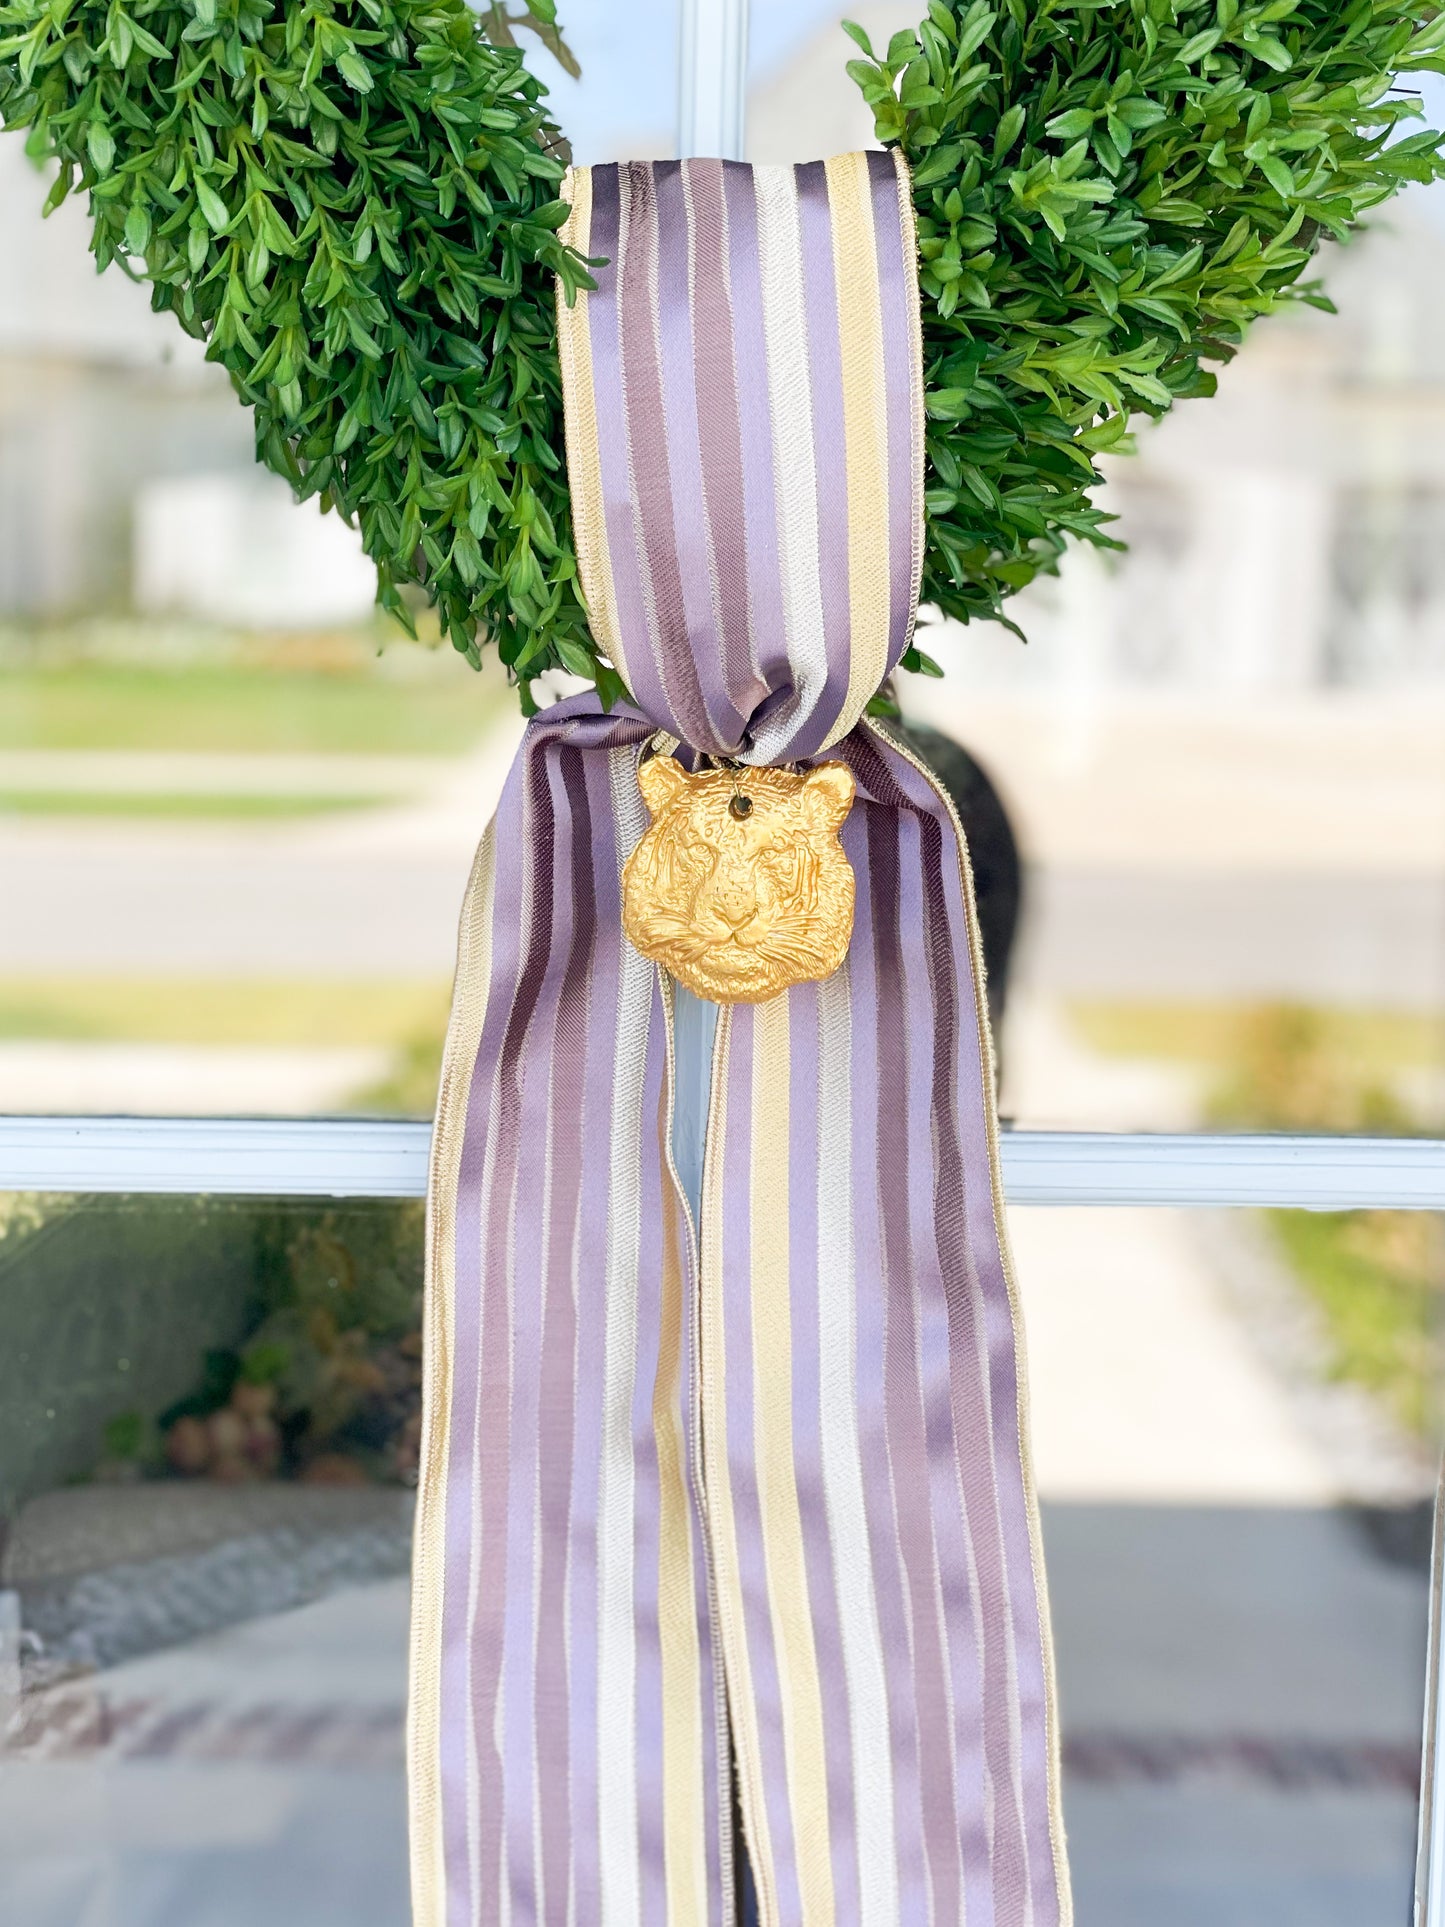 Victory Wreath And Sash With Tiger Head